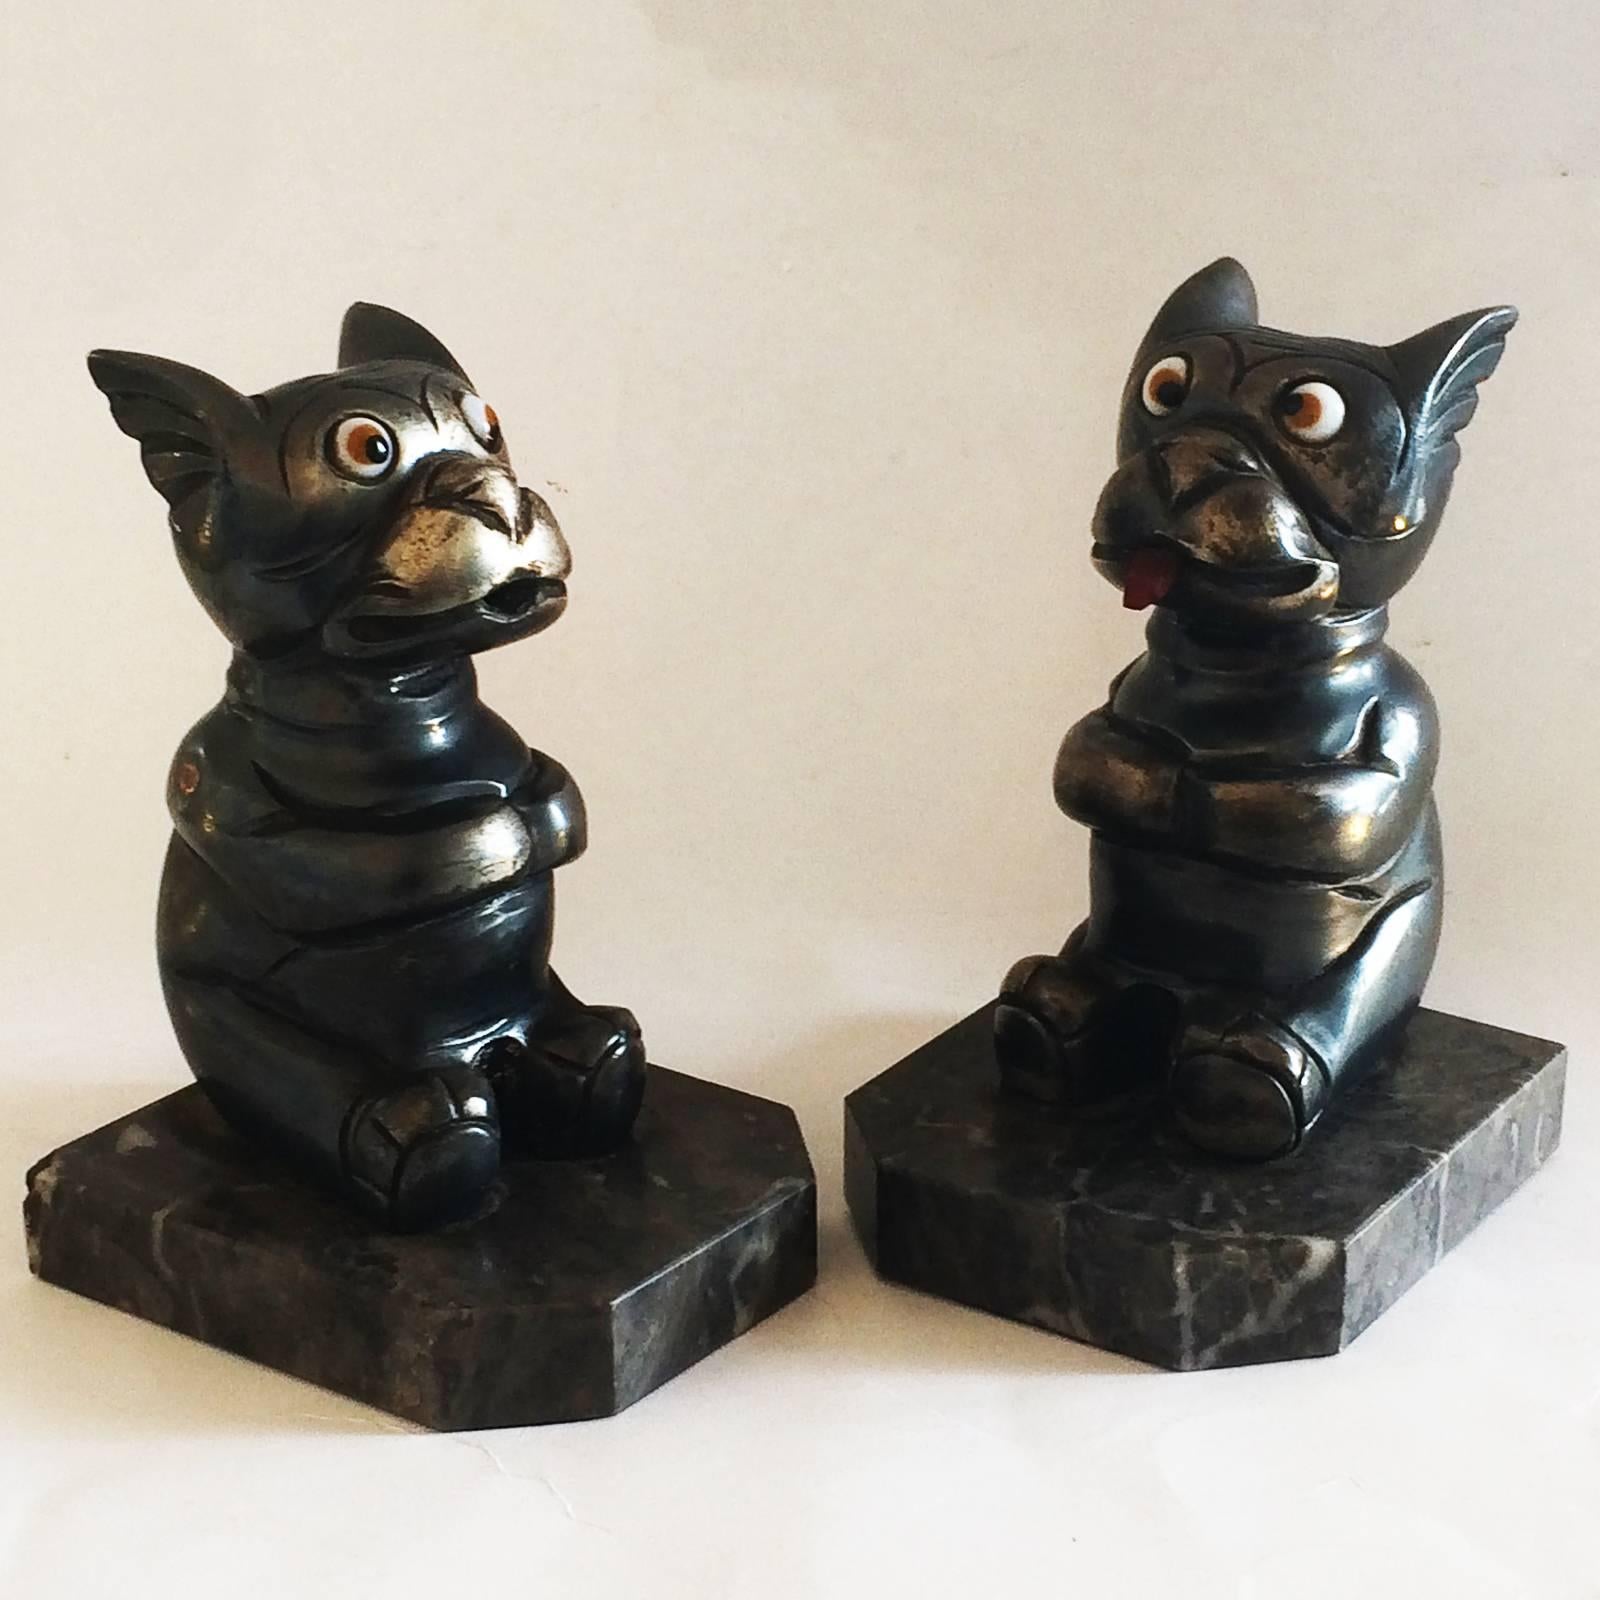 French Art Deco Pair of Comical Bookends by Hippolyte Francois Moreau